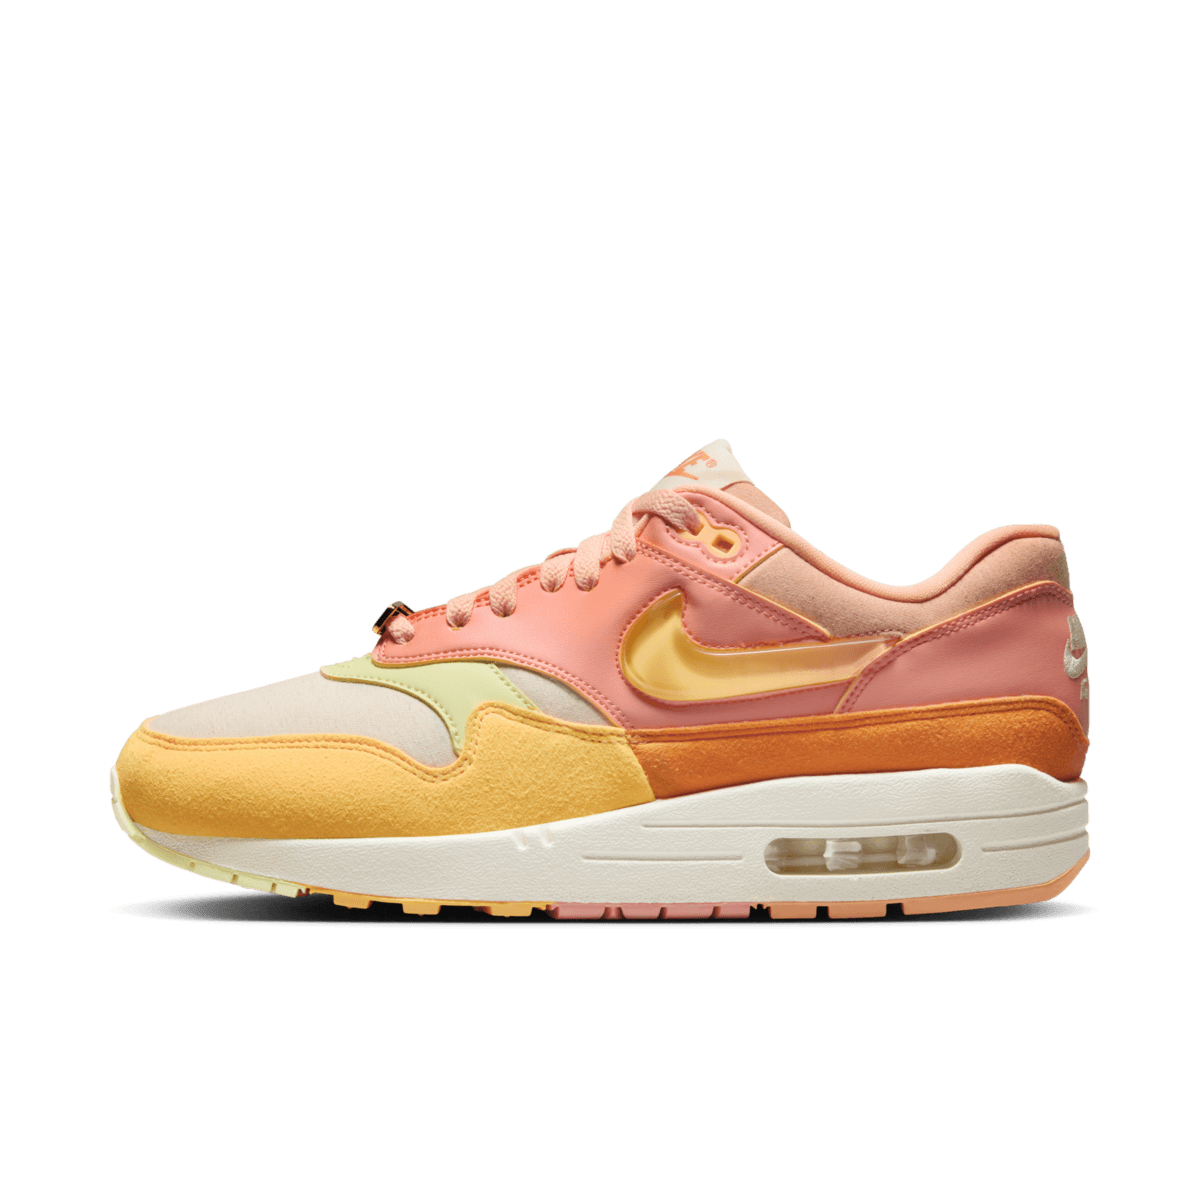 Nike Air Max 1 'Orange Frost' - Puerto Rico Pack - US Exclusive FD6955-800